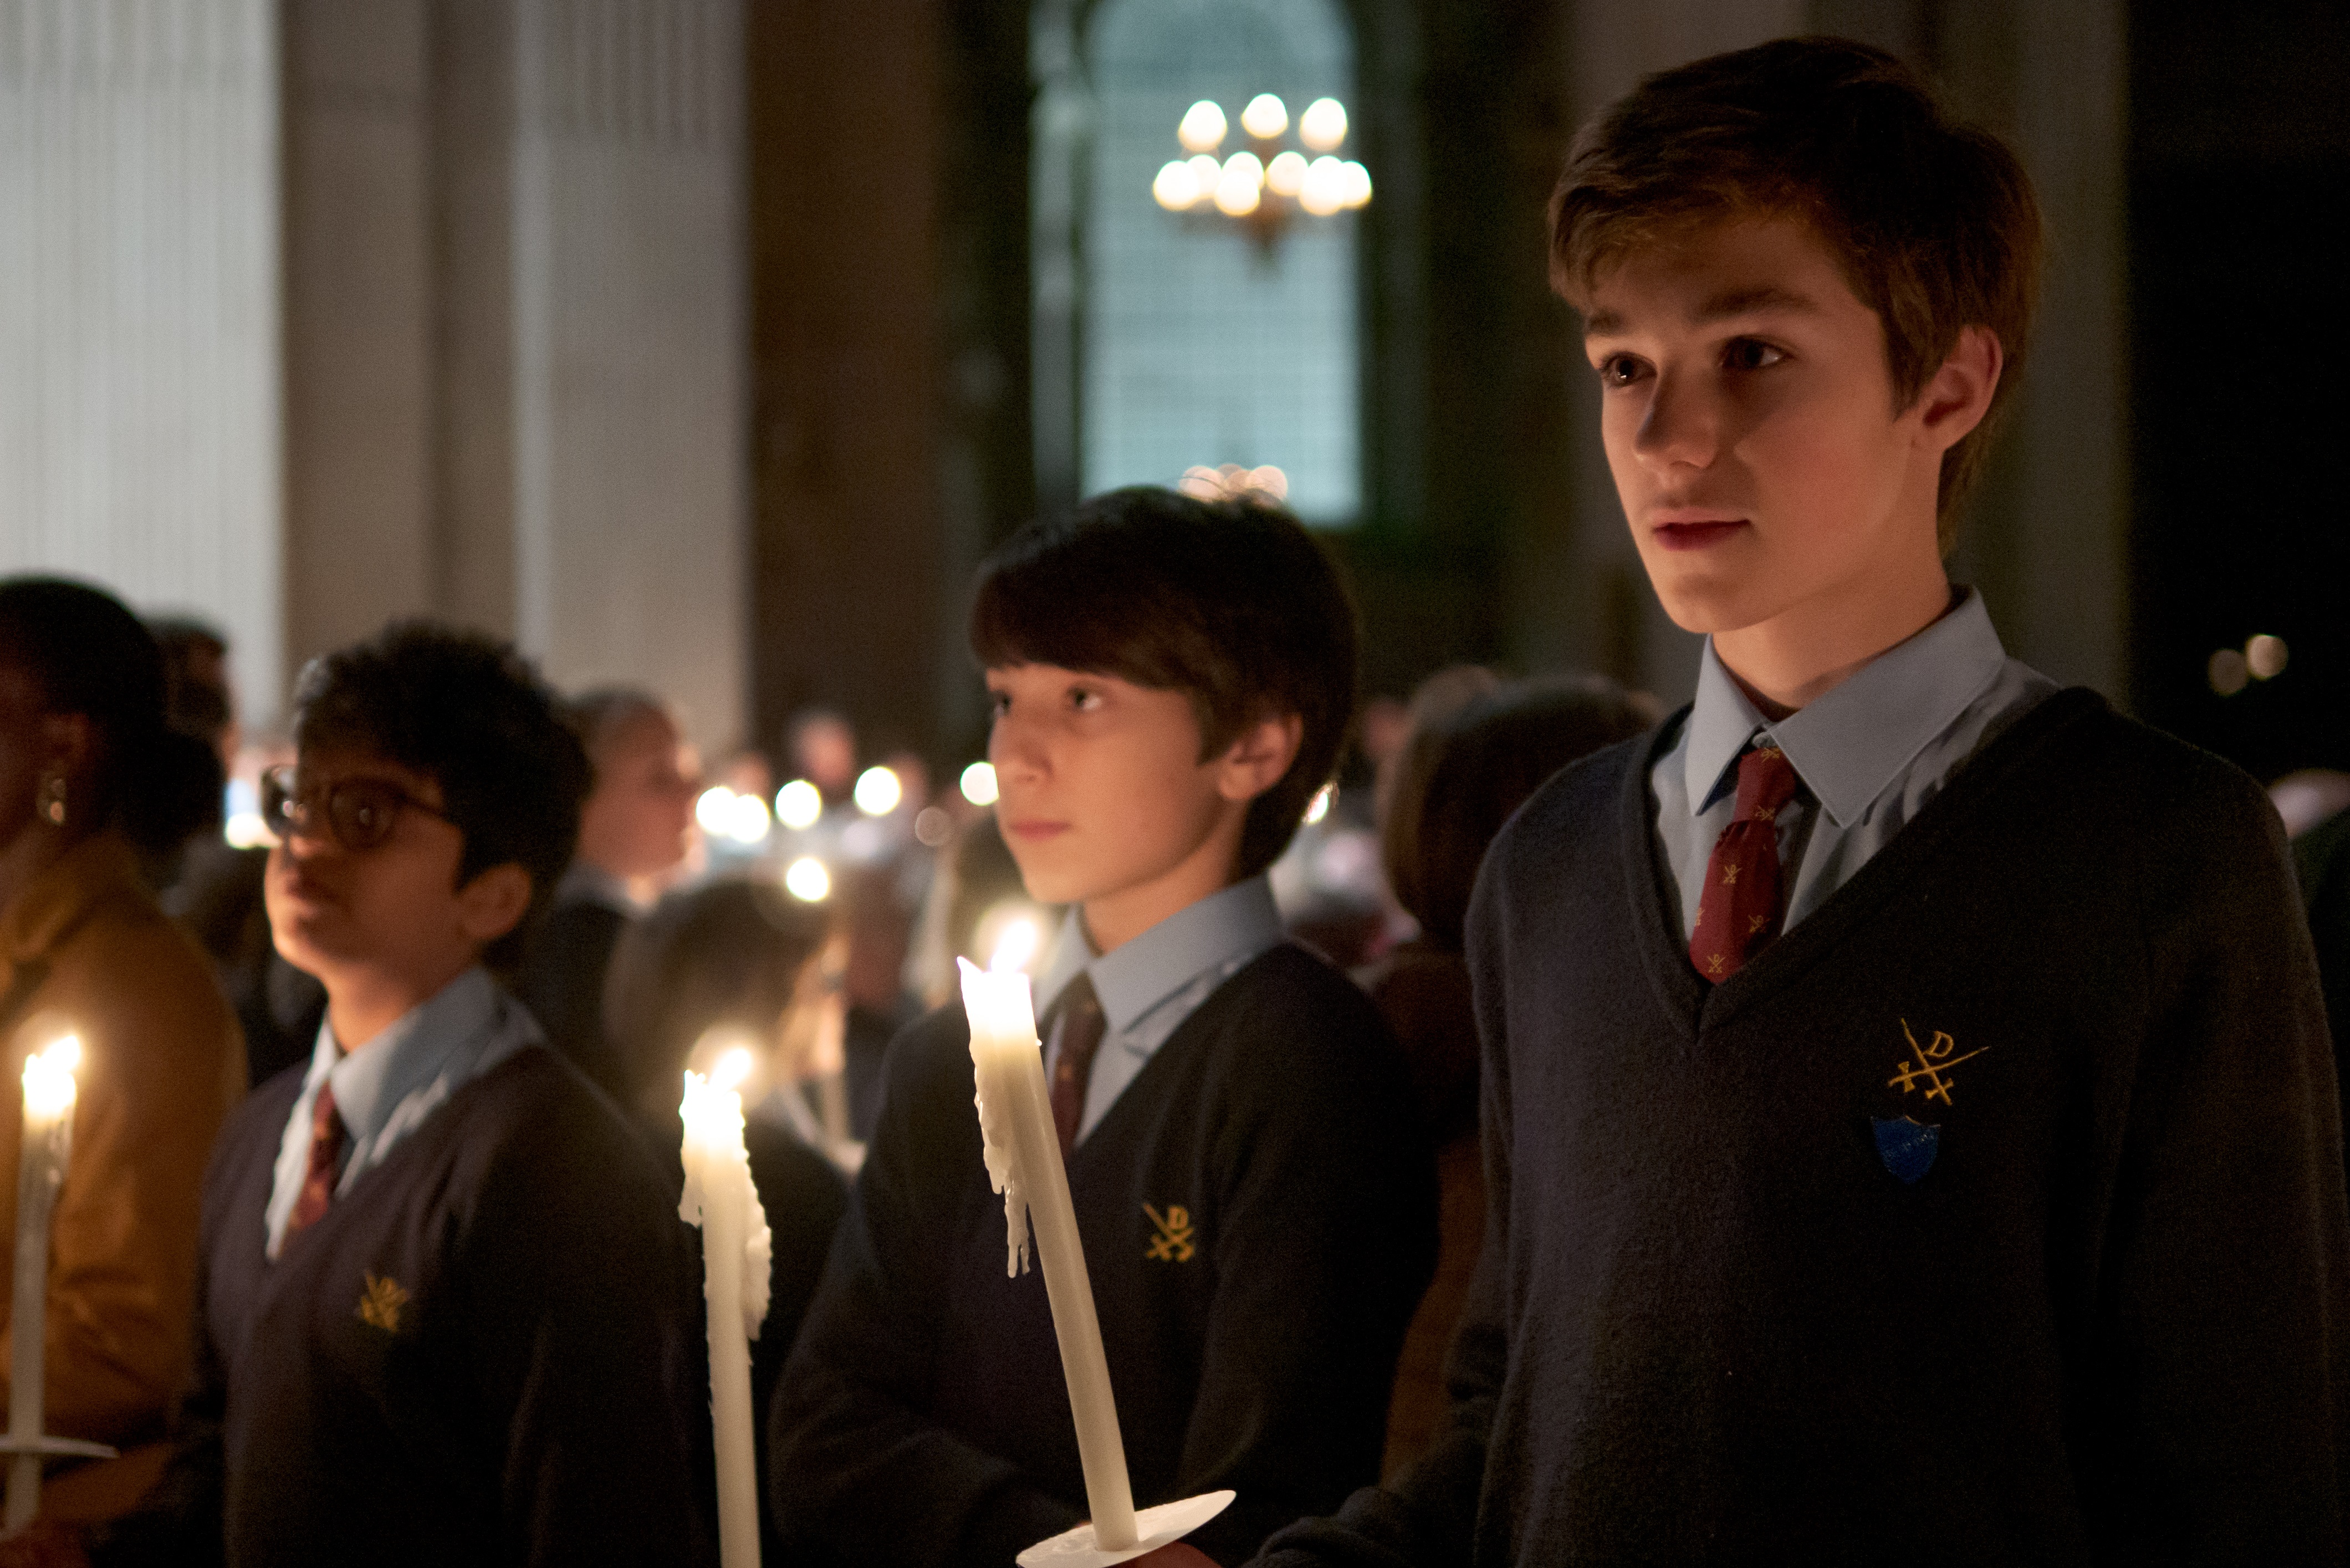 Group of school boys holding candles in the cathedral